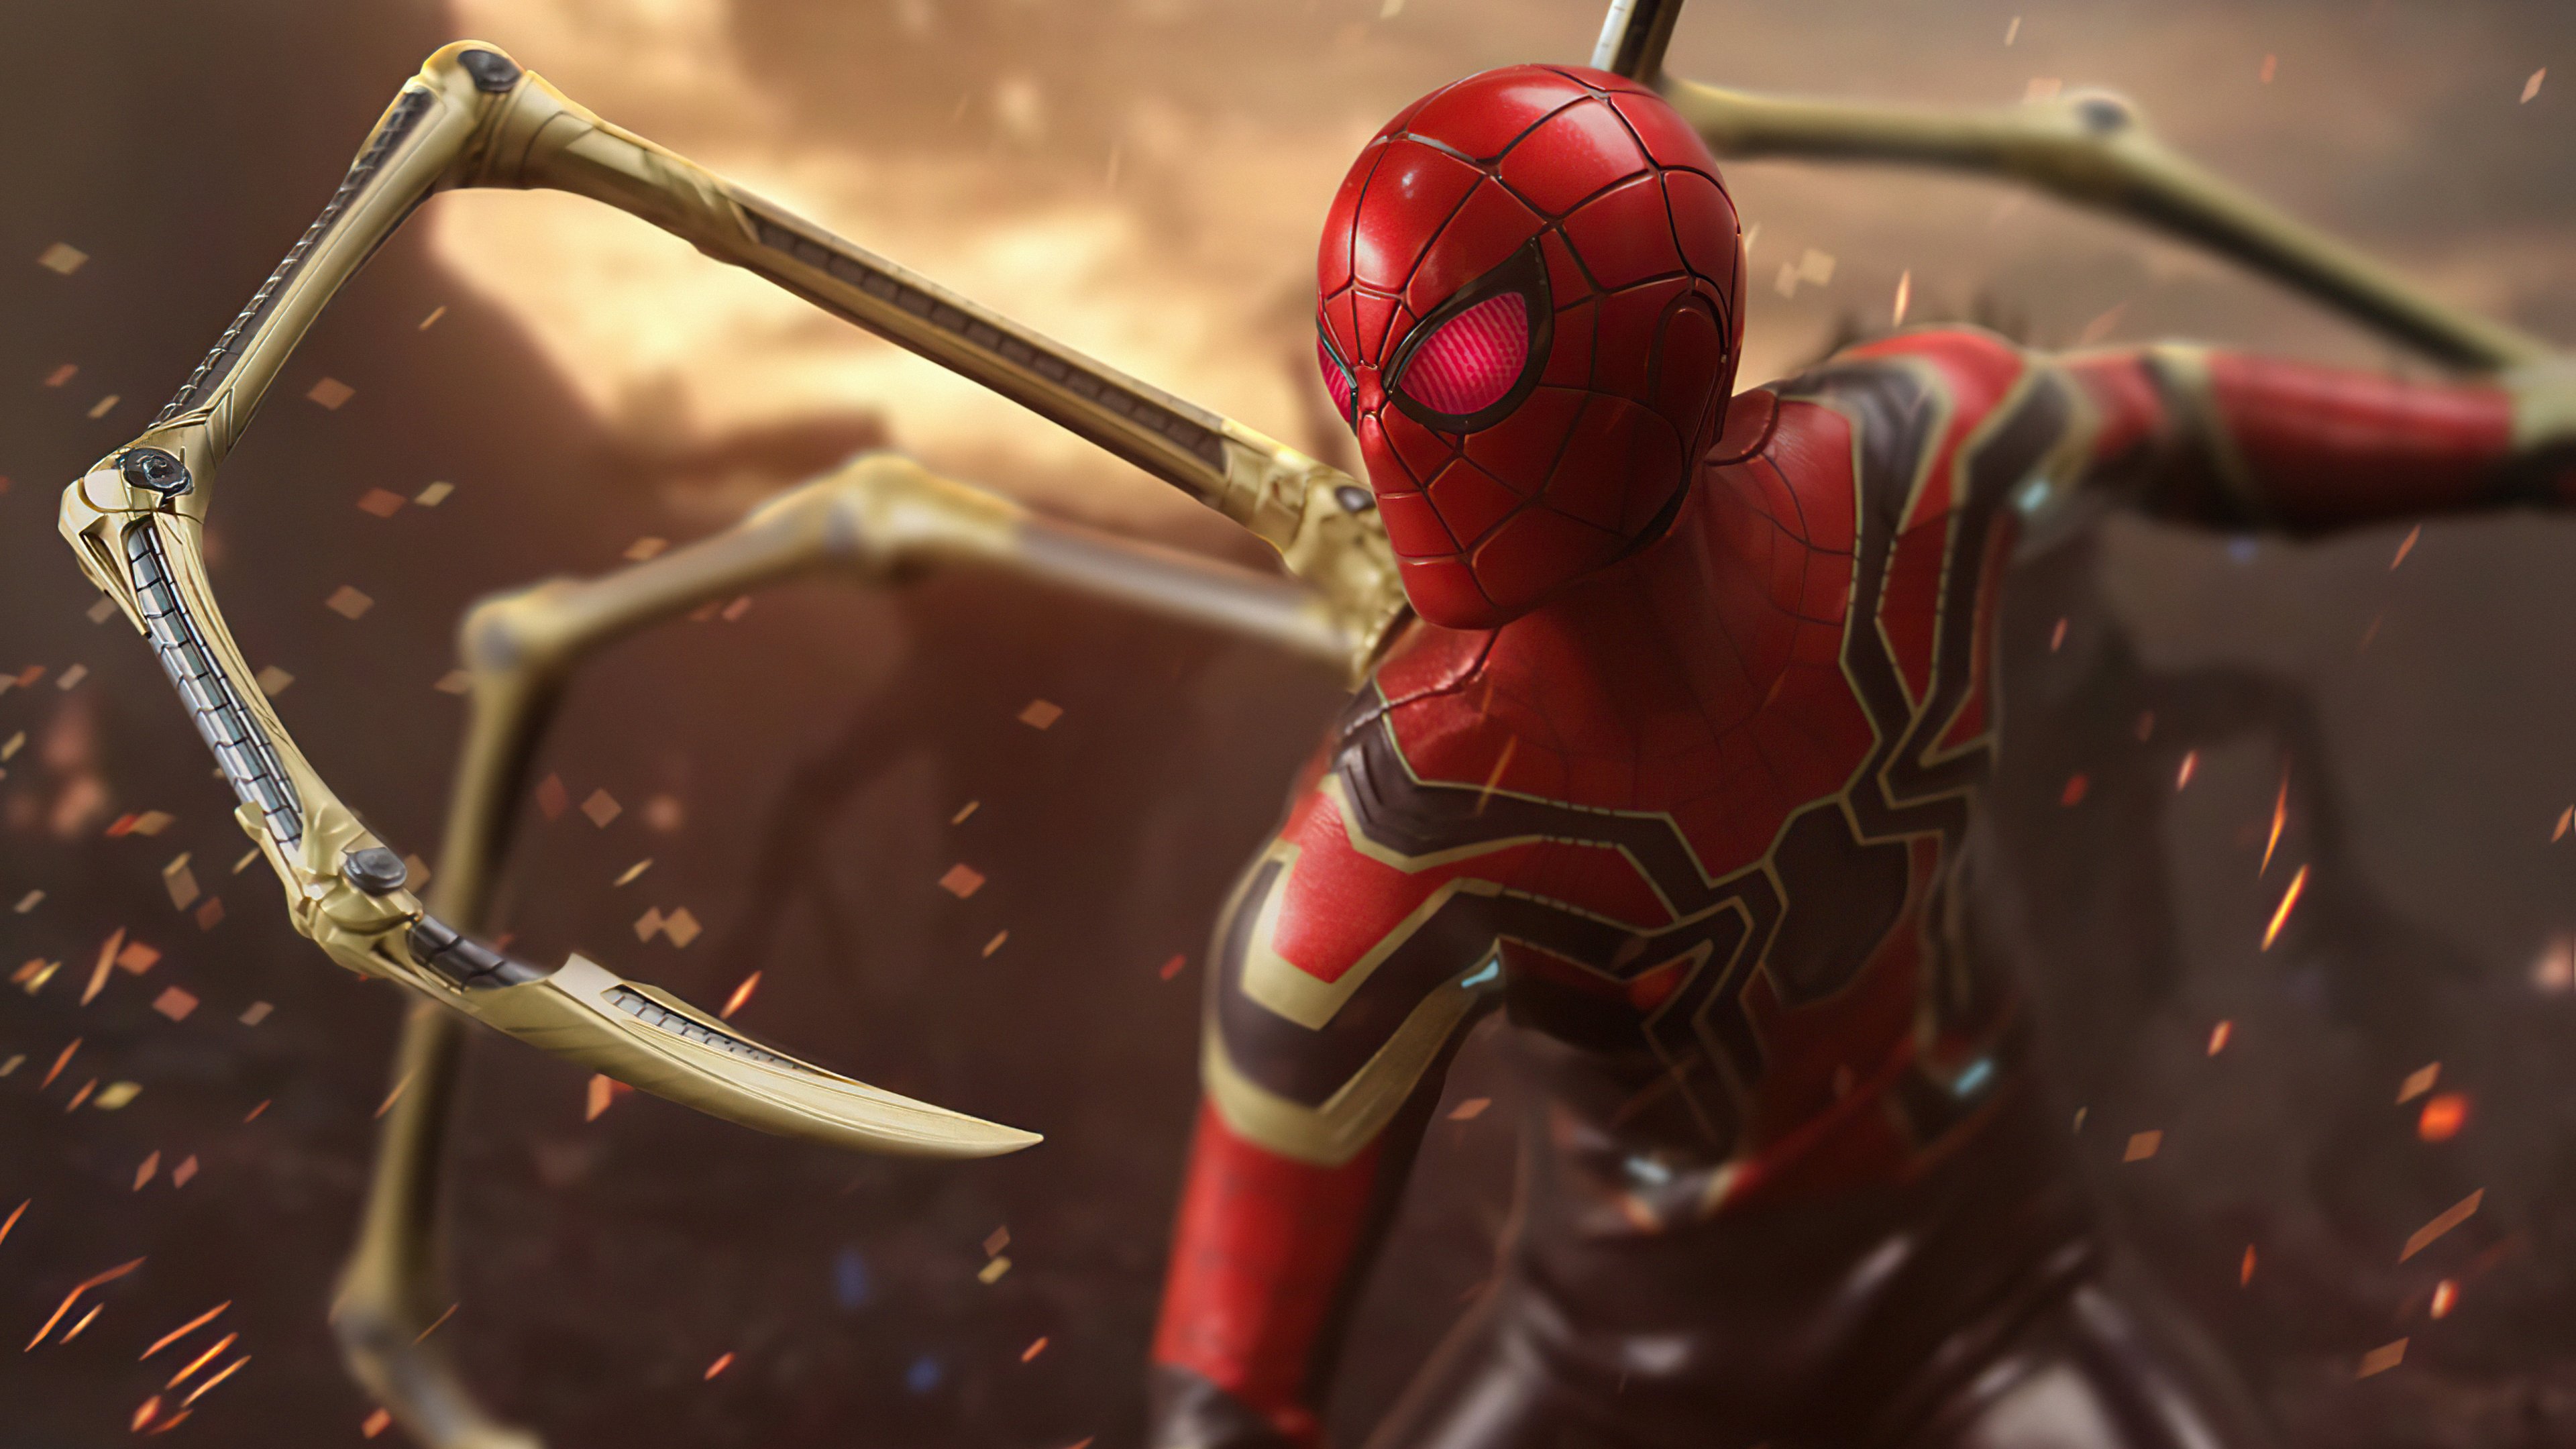 Iron Spider red eyes Wallpaper 5k Ultra HD ID:7390